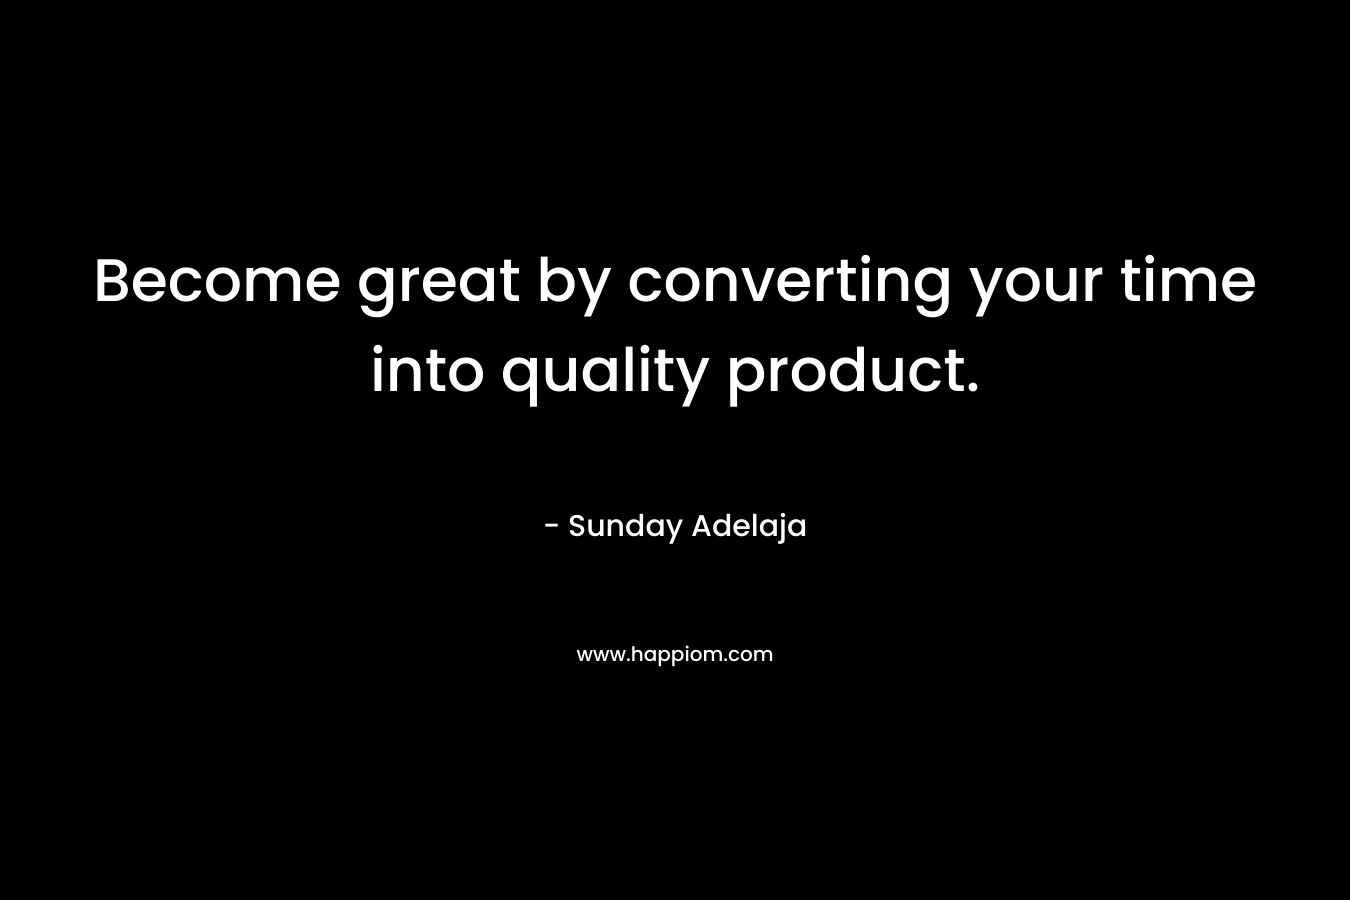 Become great by converting your time into quality product.